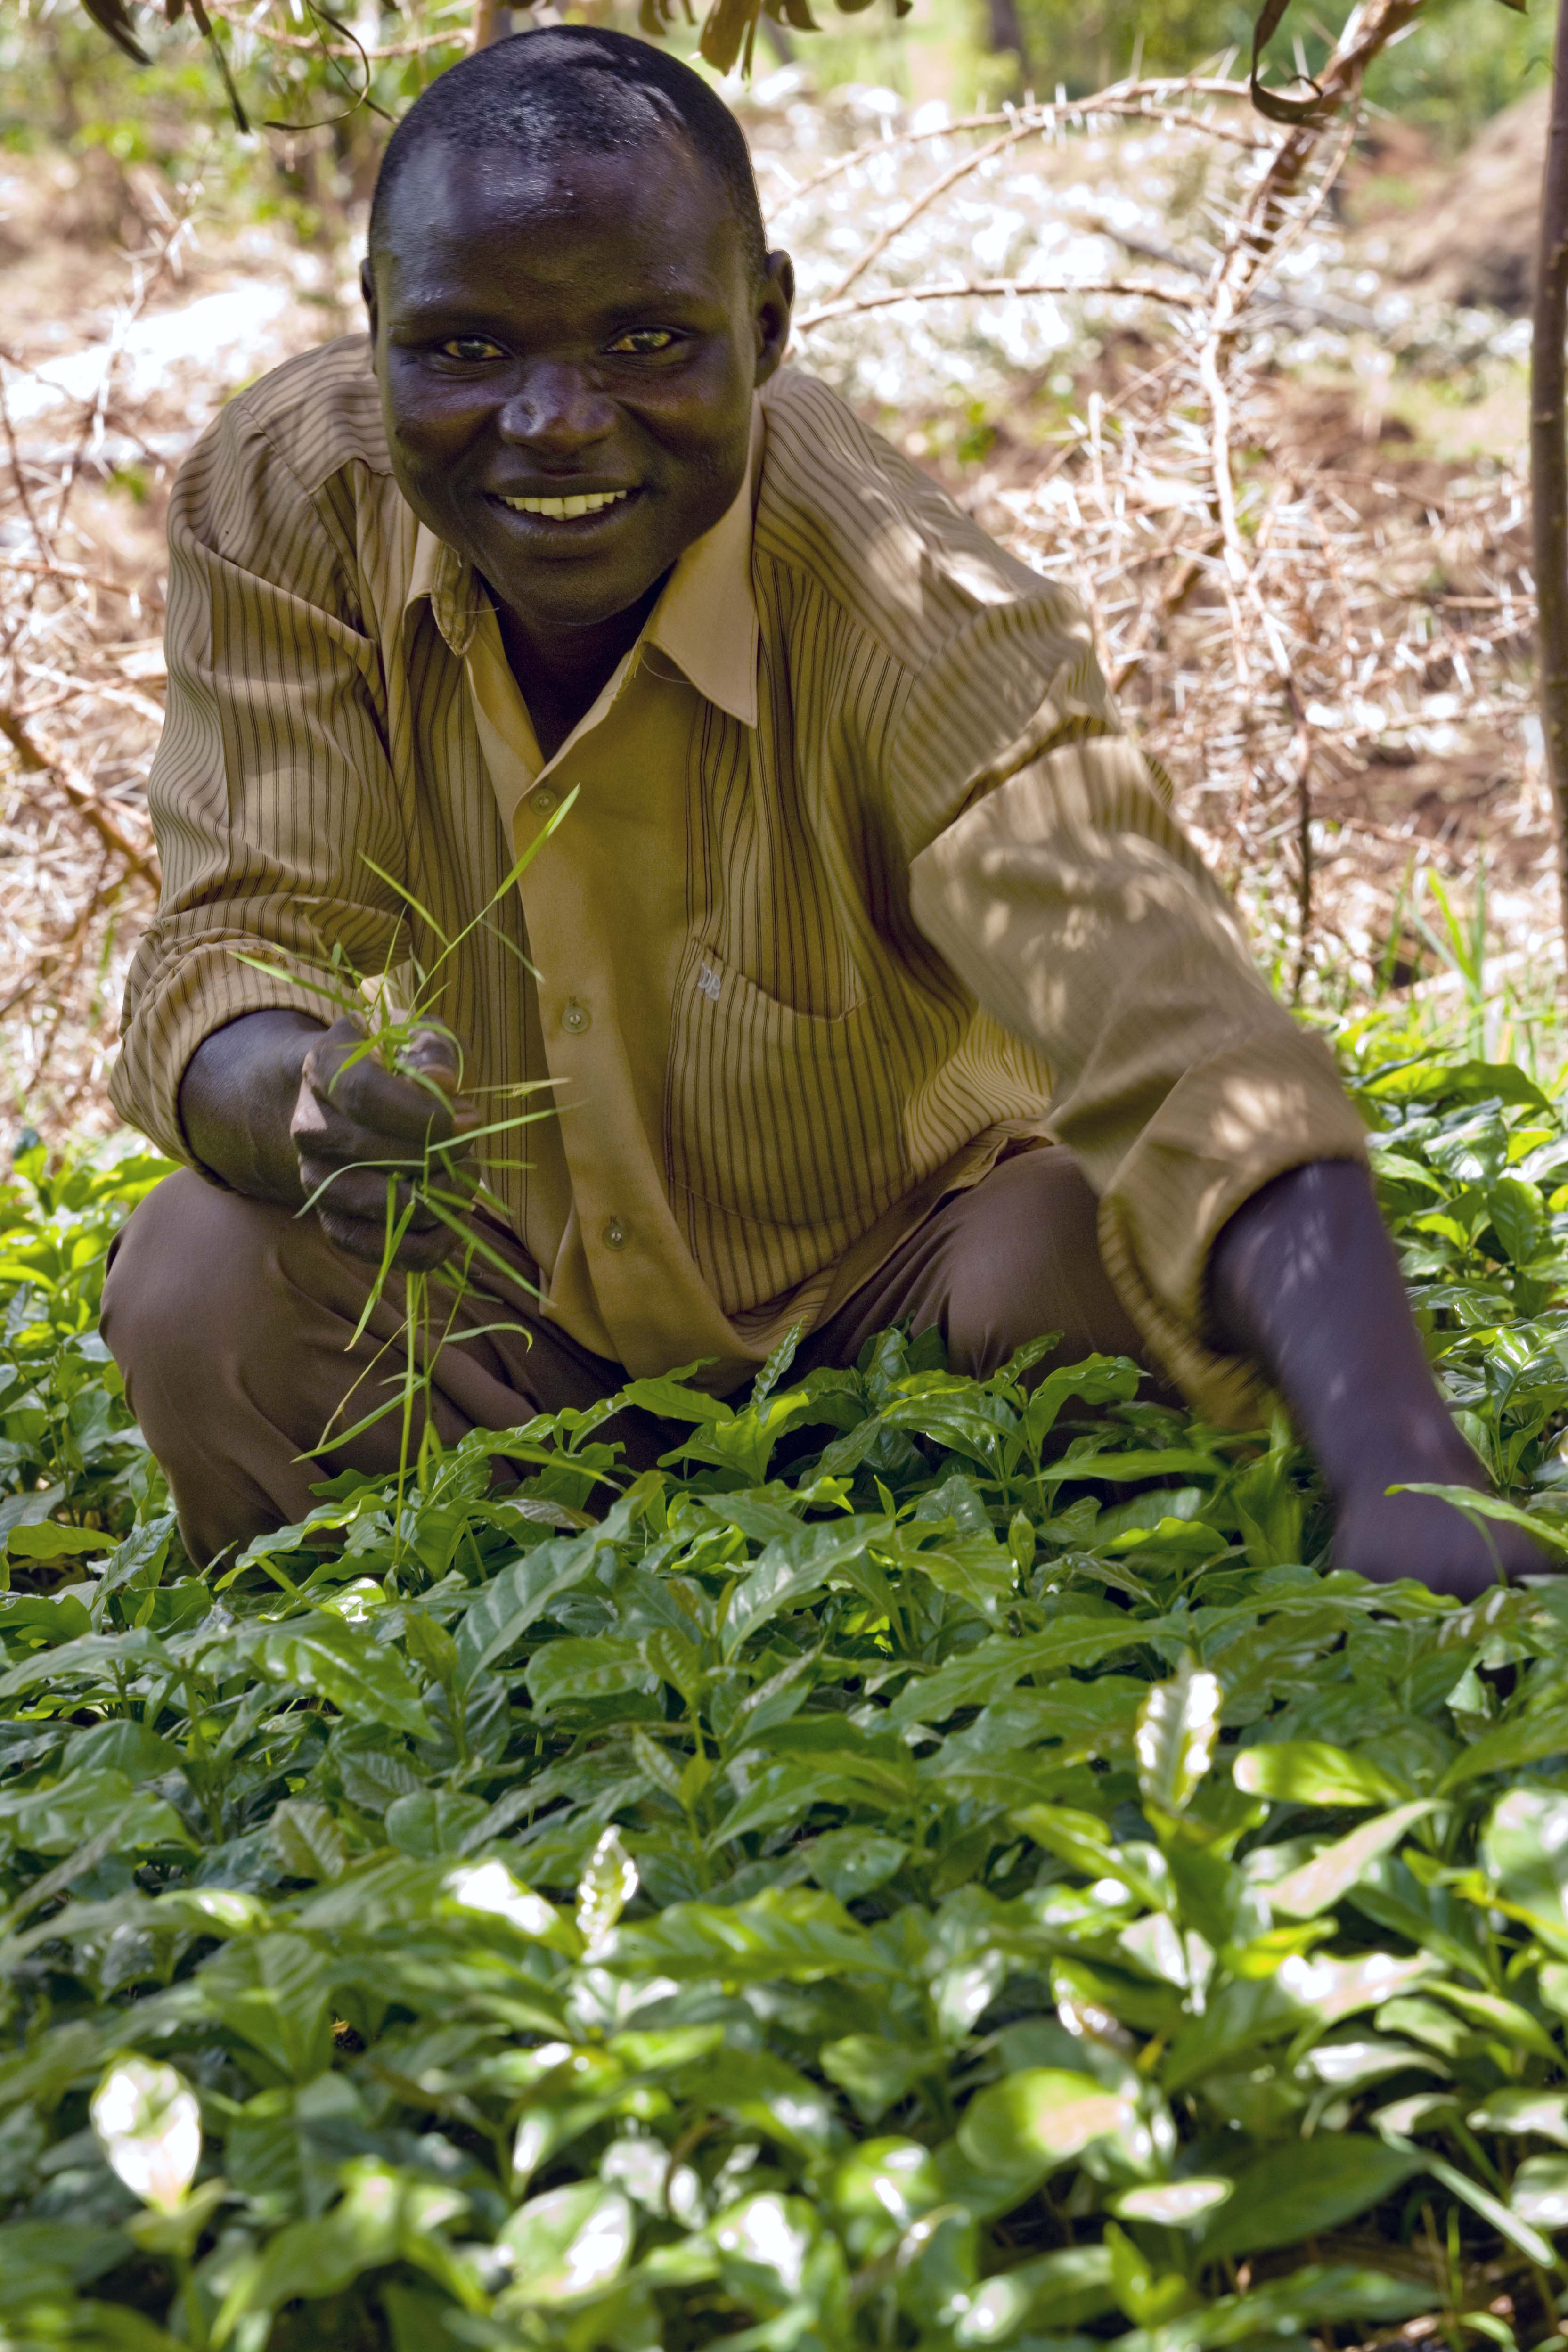 A man tends to his newly planted tree seedlings in a nursery in Arokwo Village, Kapchorwa,Uganda, on 11th March, 2009. (10662551583)